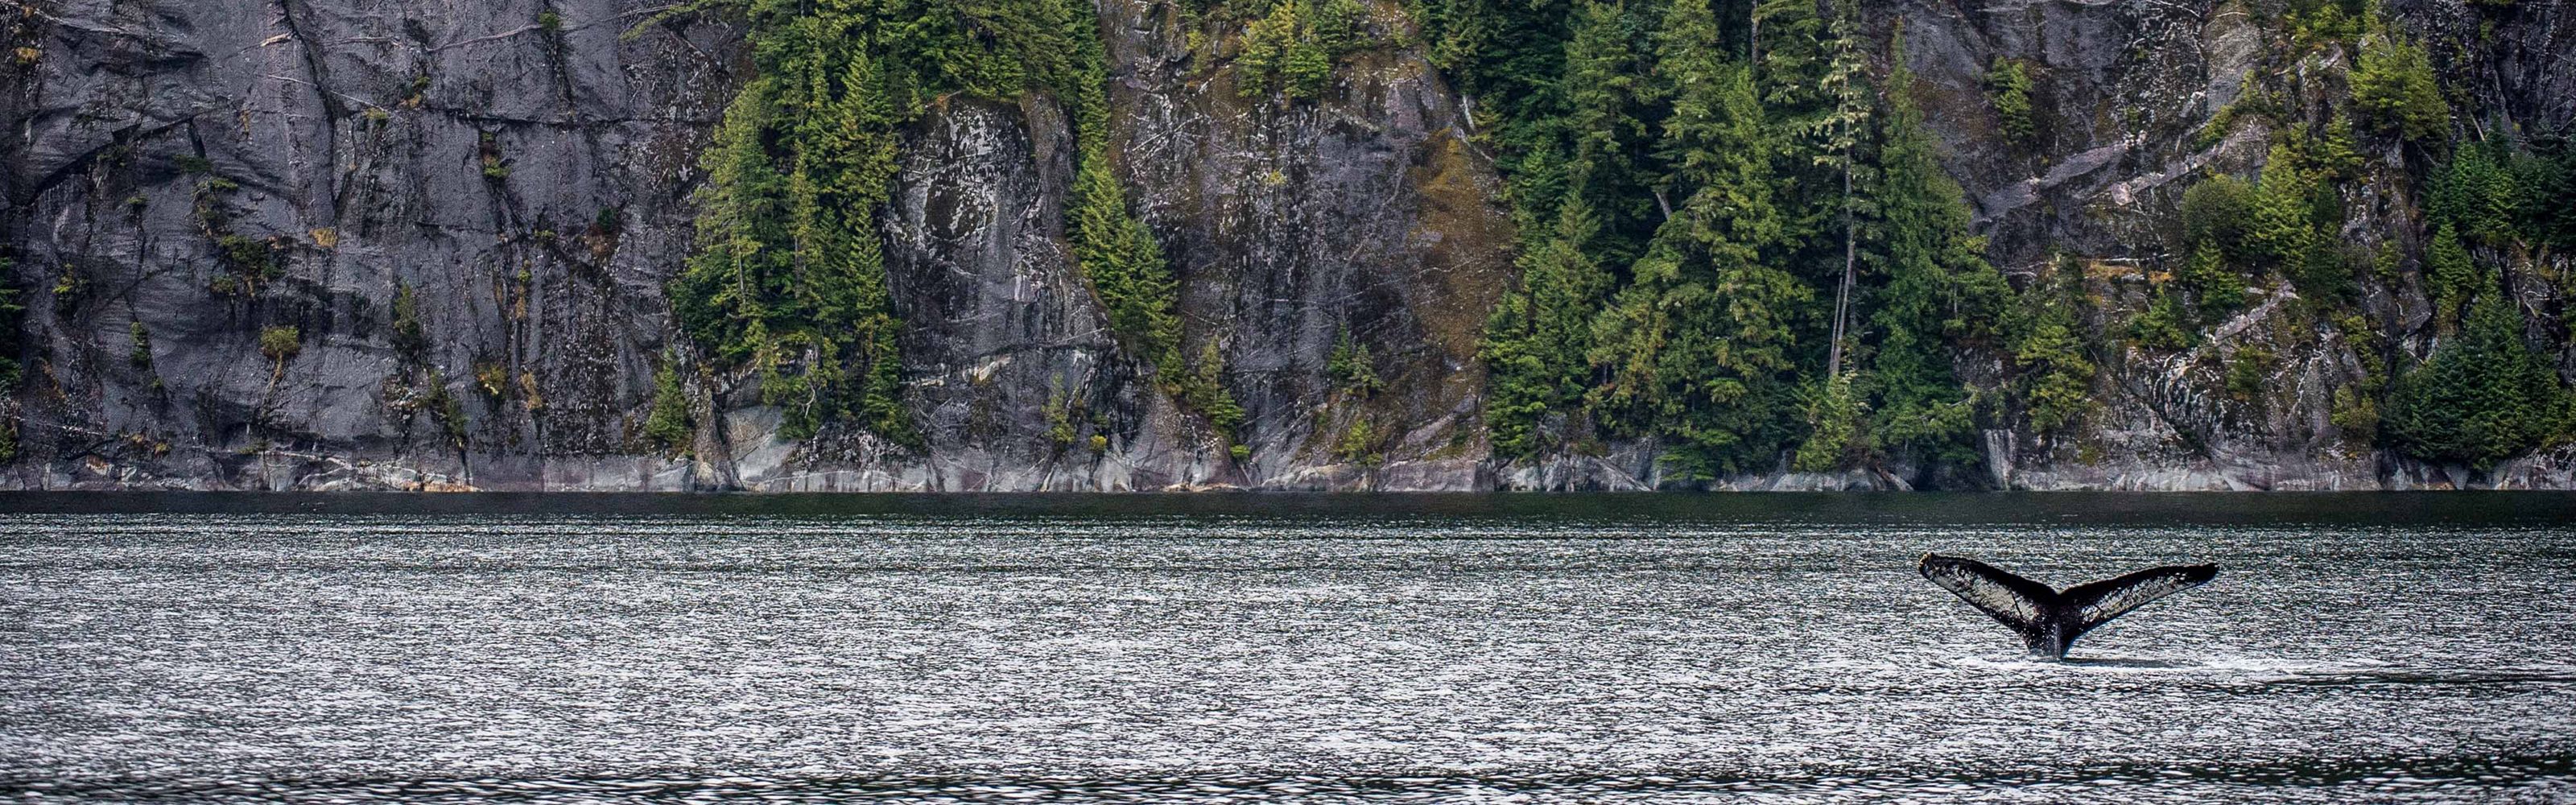 a whale tale pops out of the water in front of a cliff with trees on it